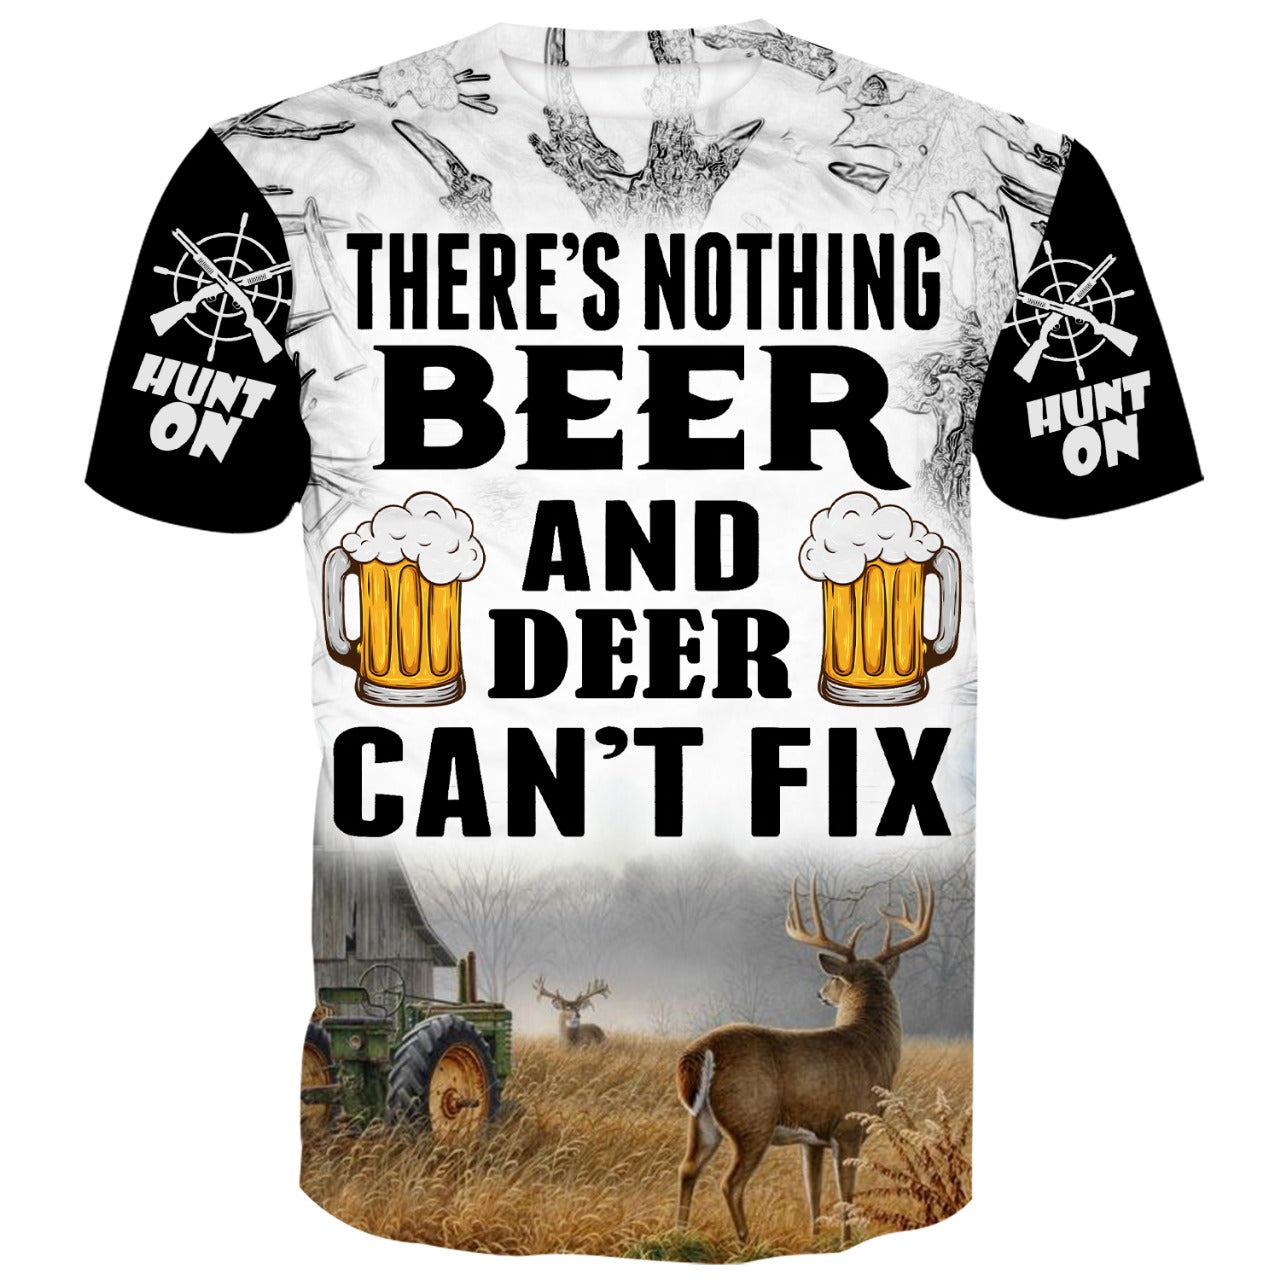 There's nothing Beer and Deer can't fix - Funny Deer Hunting shirt